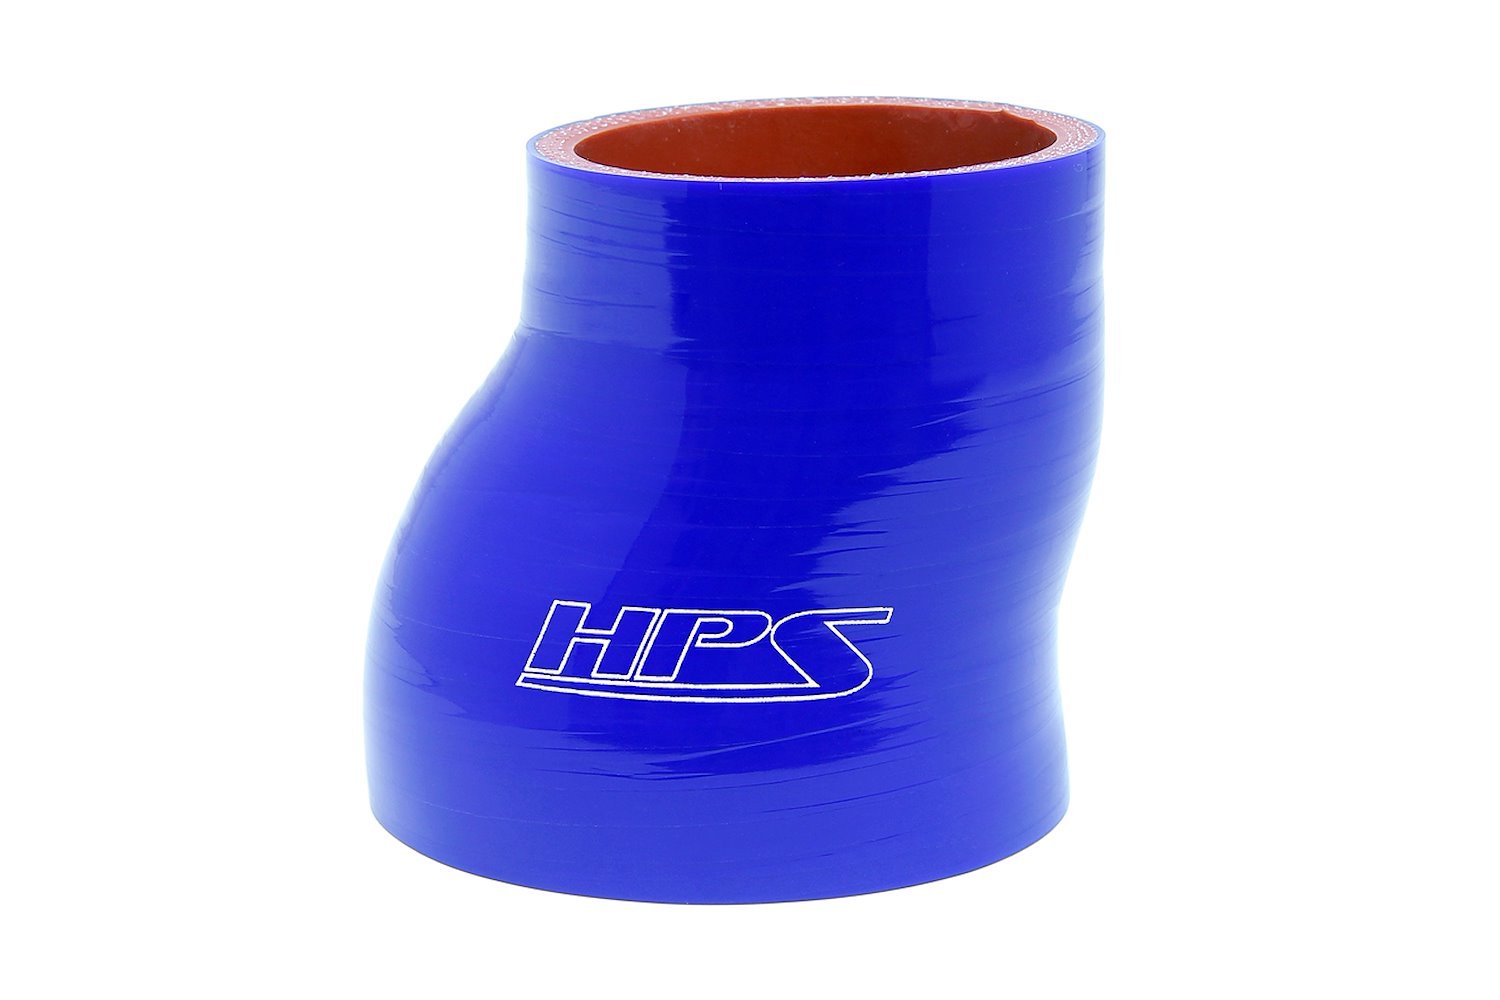 HTSOR-200-250-BLUE Silicone Offset Reducer Hose, High-Temp Reinforced, 2 in. - 2-1/2 in. ID, 3 in. Long, Blue